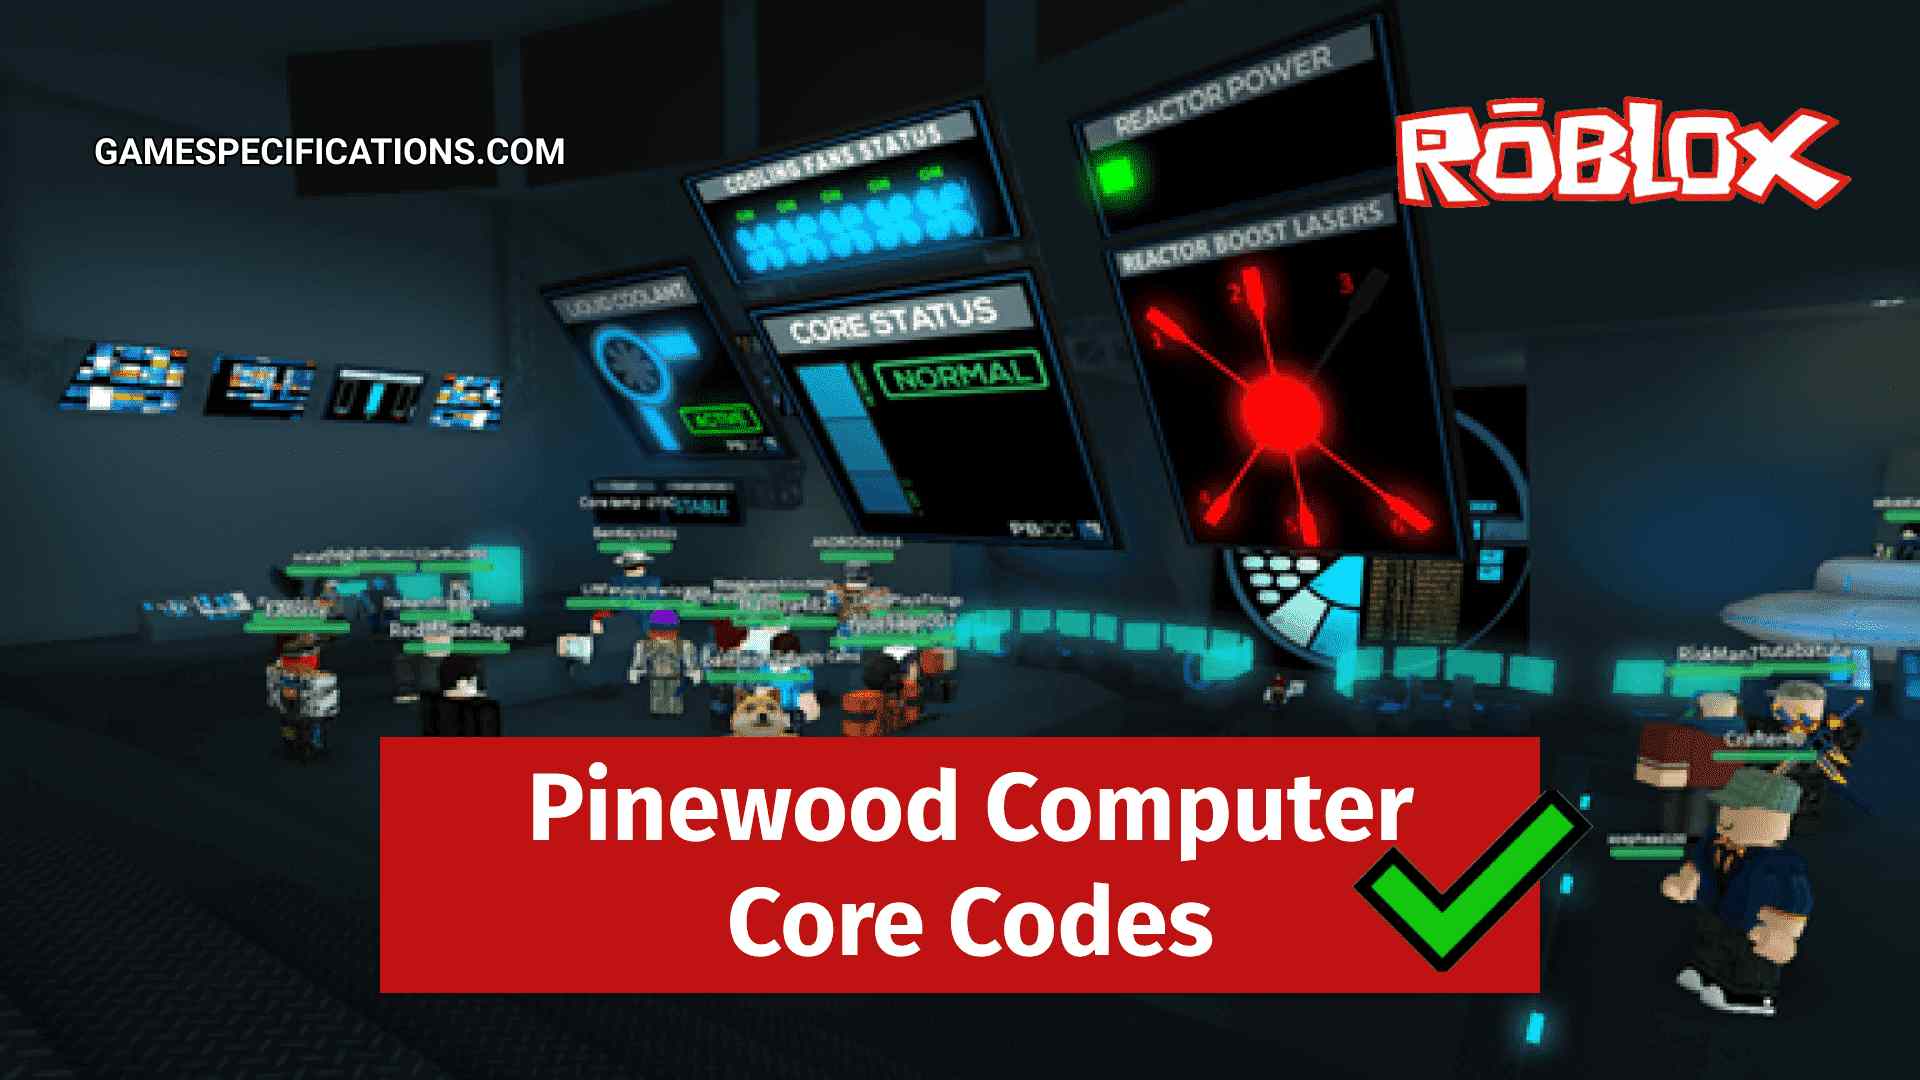 Roblox Pinewood Computer Core Codes July 2021 Game Specifications - underground facility escape room roblox